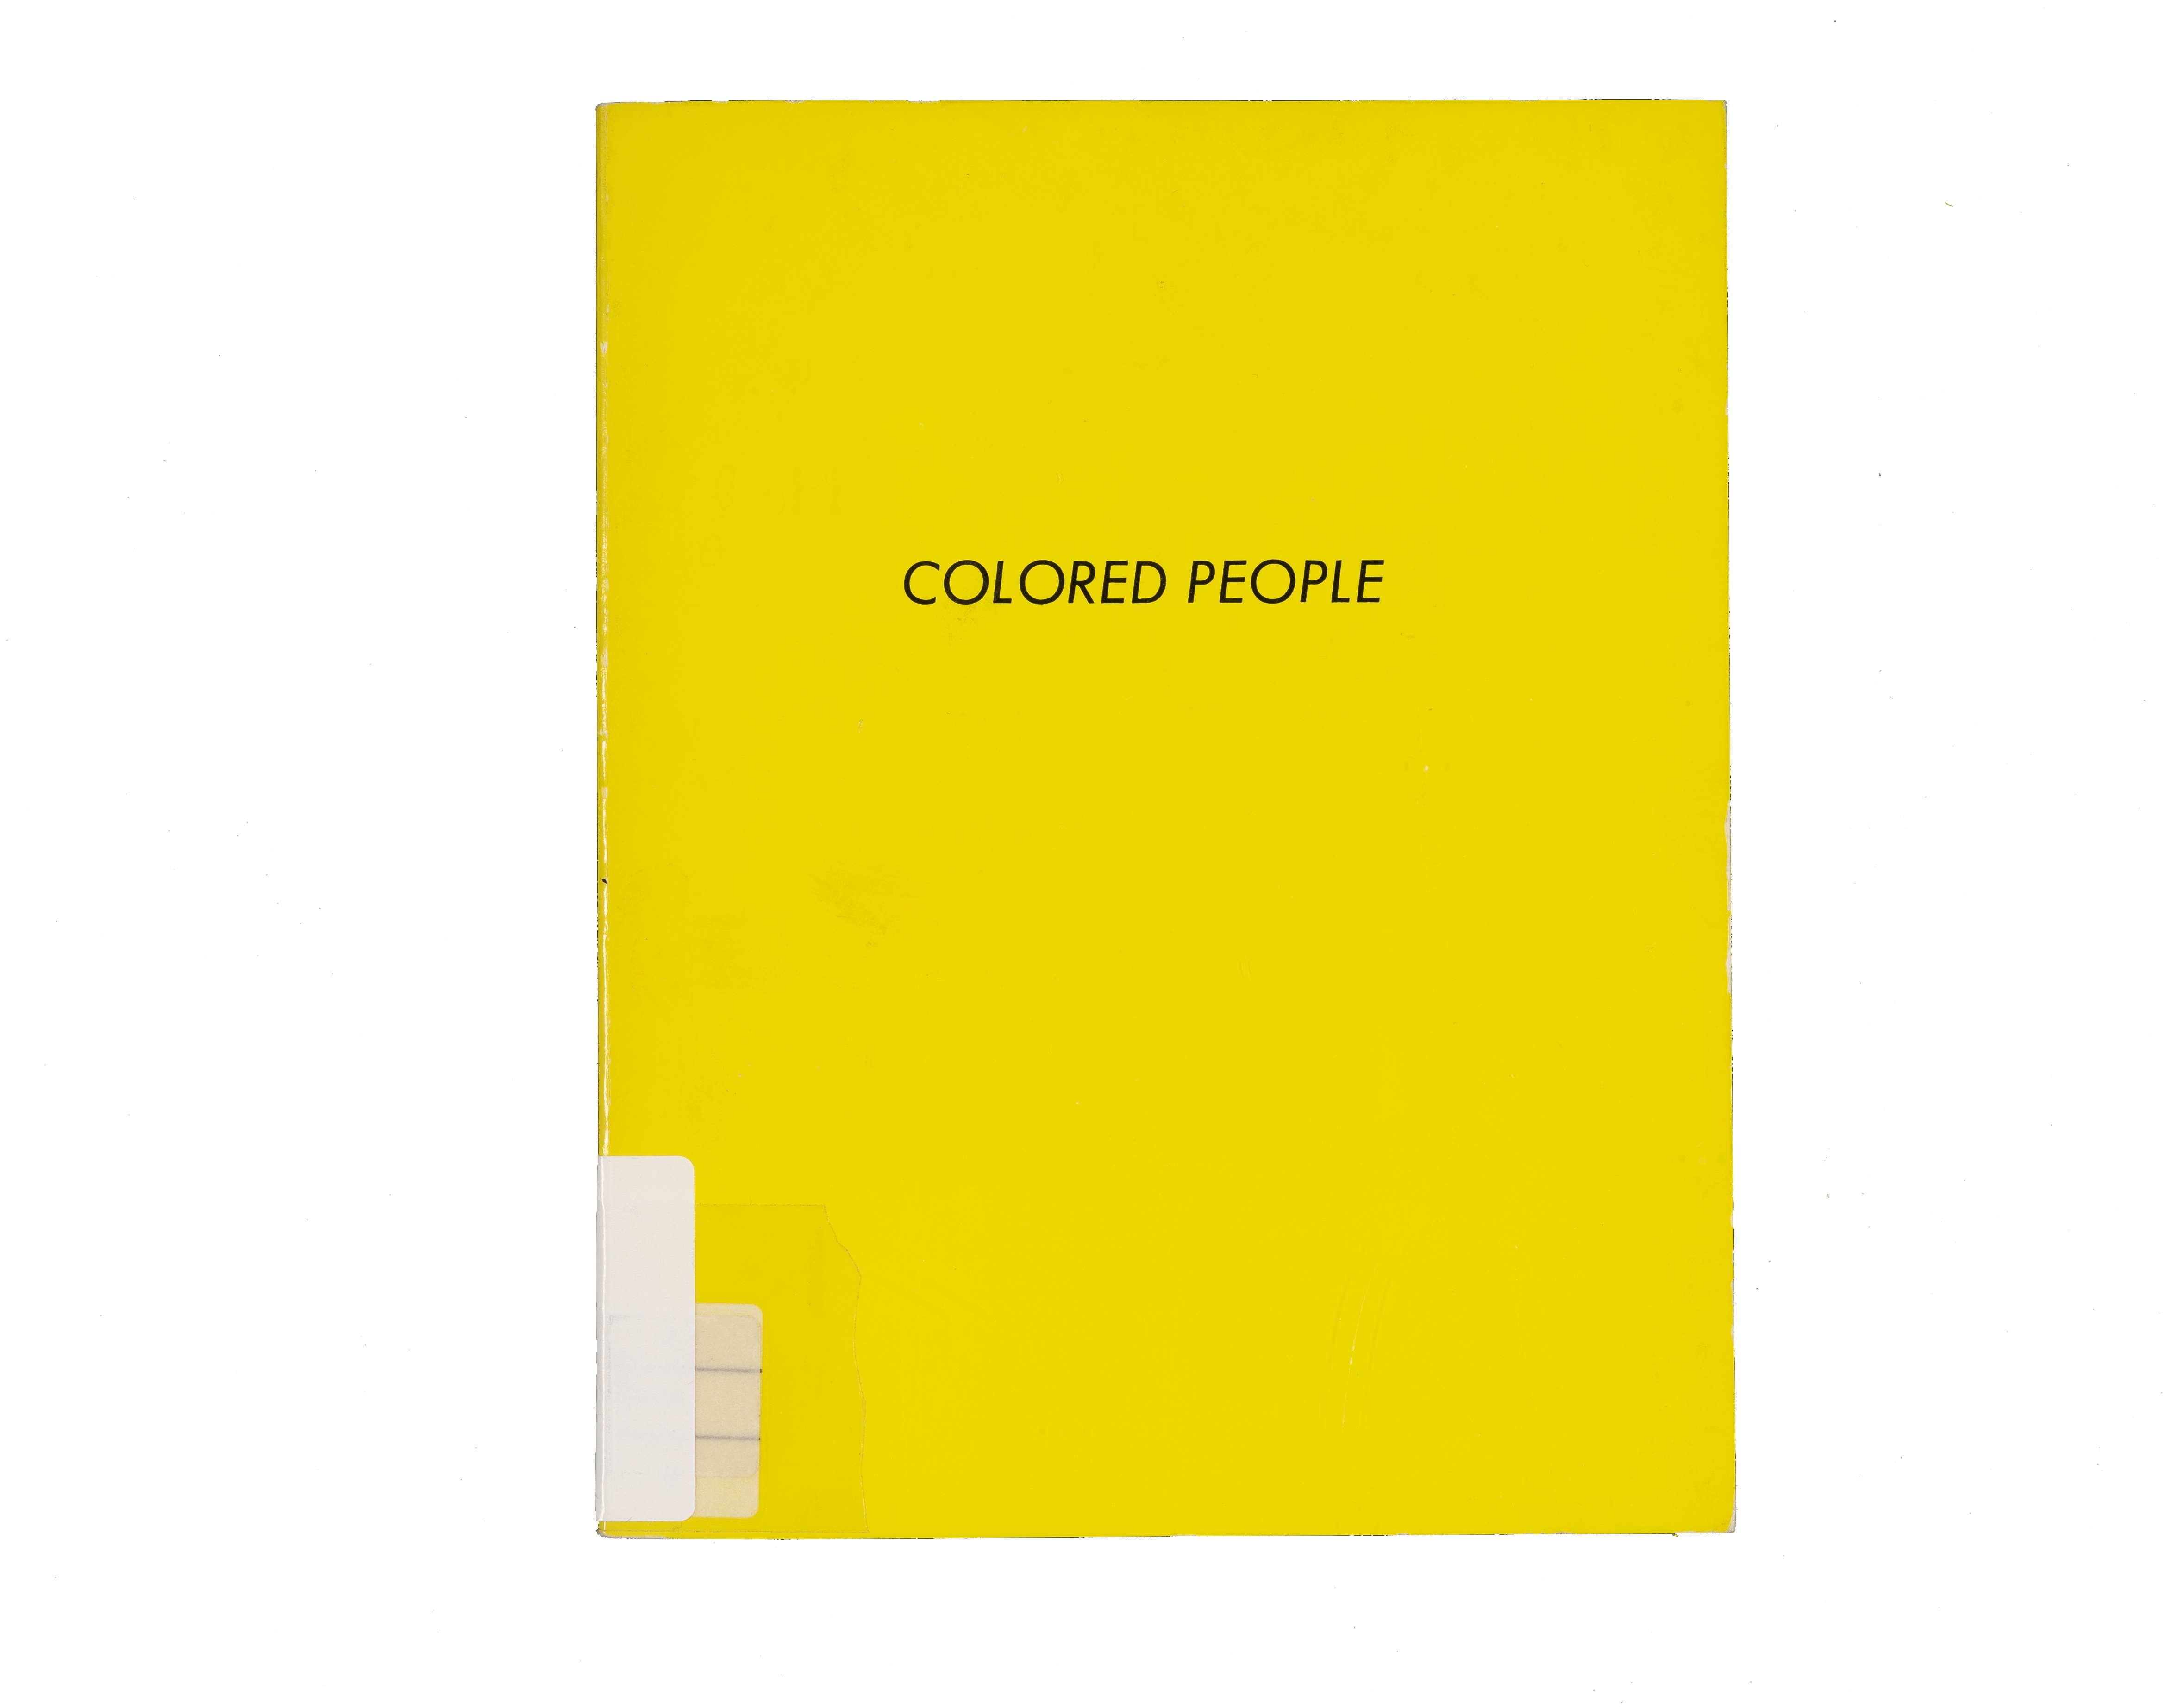 Ed Ruscha: Colored people, 1972 (cover)